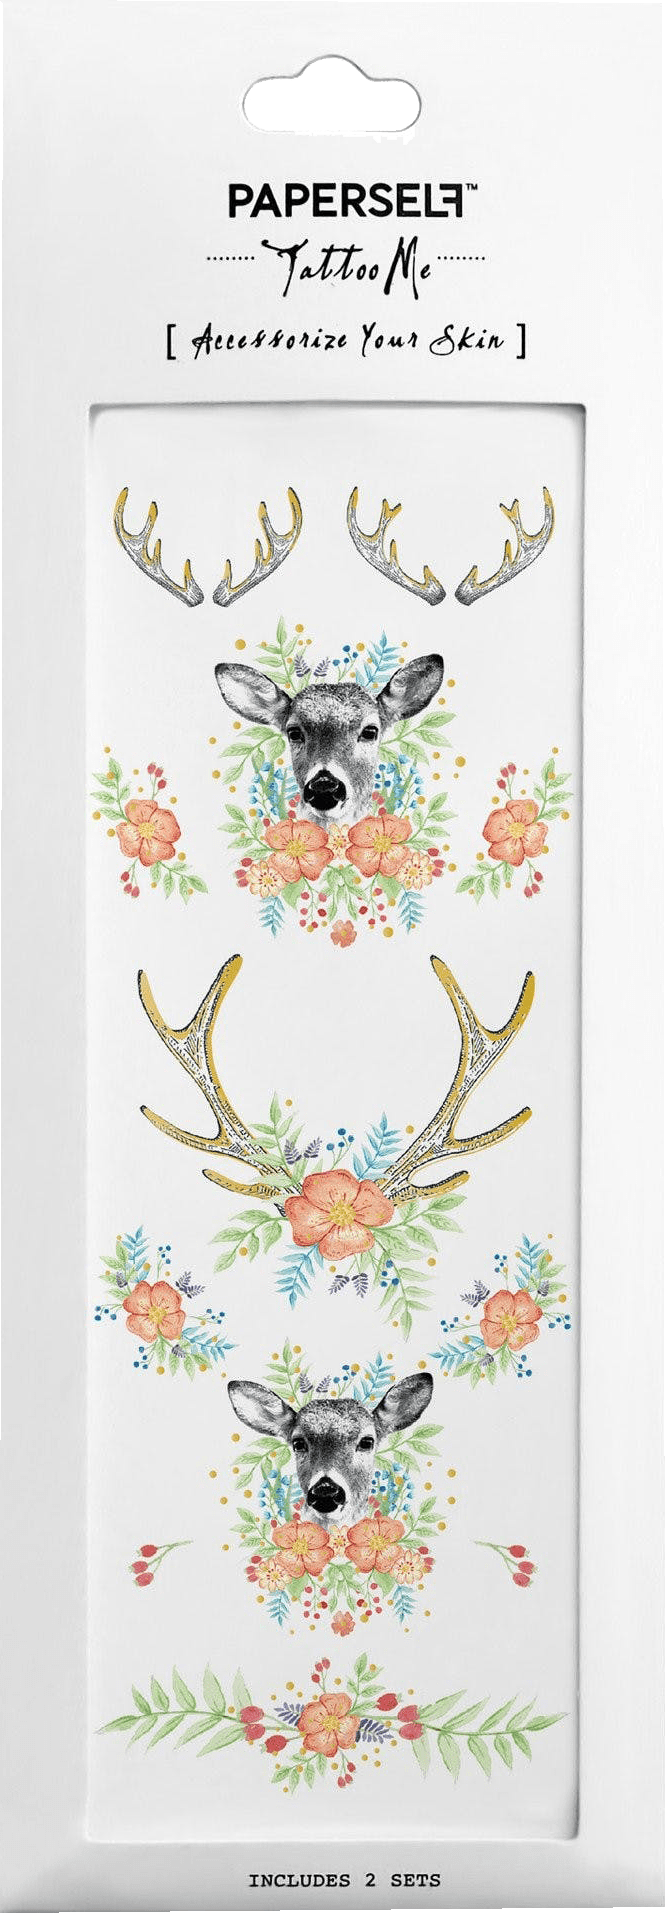 Paperself Tattoo Floral Fawn